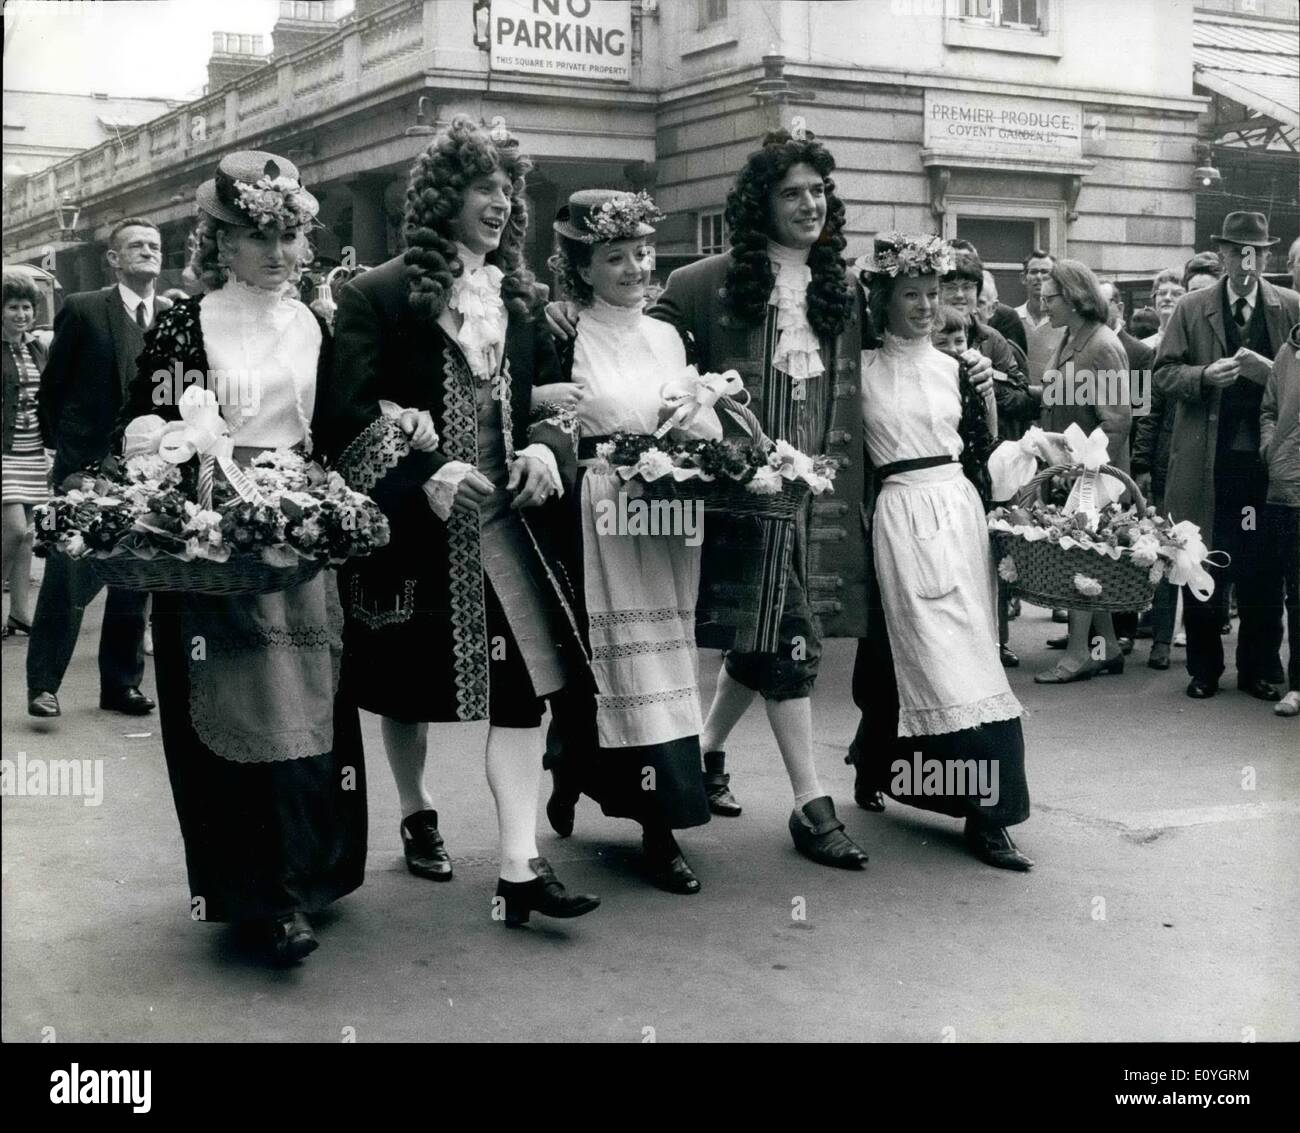 May 05, 1970 - Covent Garden Market Goes Gay For Its 300th. Birthday Celebrations: Covent Garden, London's famous fruit, vegetable and flower market, which was royally chartered by Charles 11 exactly 300 years ago and yesterday the market had a fair to celebrate its tercentenary, Prince Philip attended the celebrations and joined in the fun. Photo shows Girls wearing Elisa Doolittle flower-seller costumes during the 300th birthday celebrations in the market yesterday. The market is to be moved to a new 30-million site at Nine Elms, Vauxhall, in 1973. Stock Photo